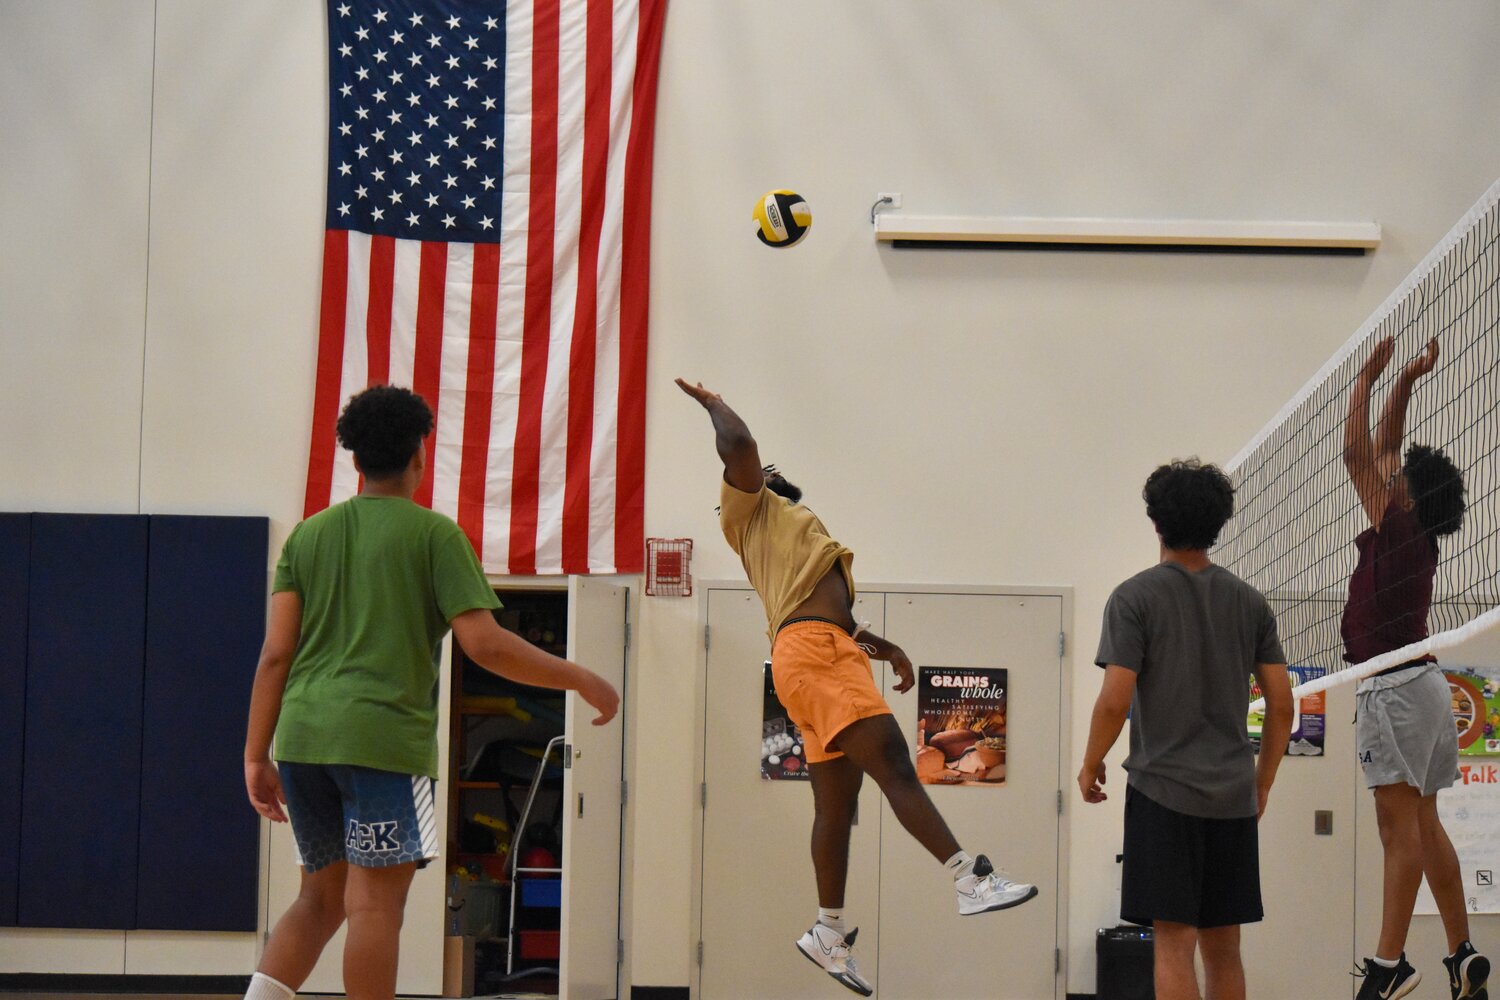 Volleyball players host open gym Tuesdays and Thursdays at NIS at 5:30 p.m.